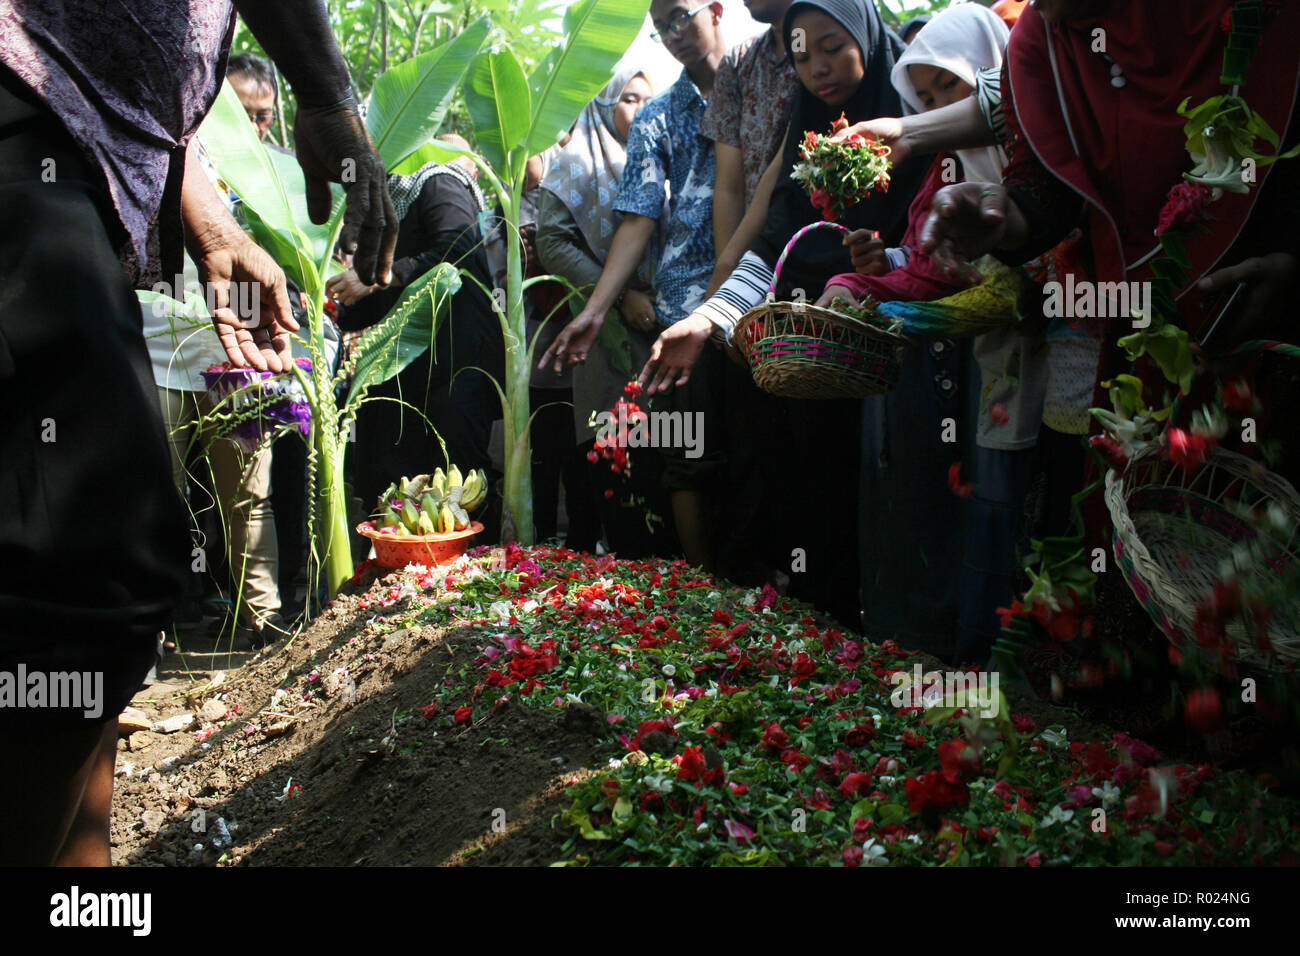 Jakarta, Tuesday. 1st Nov, 2018. Relatives put flowers to the grave of Jannatun Cintya Dewi, a passanger who died in the crash of Lion Air JT 610, during a funeral in Sidoarjo, East Java, Indonesia, Tuesday, Nov. 1, 2018. Credit: Kurniawan/Xinhua/Alamy Live News Stock Photo